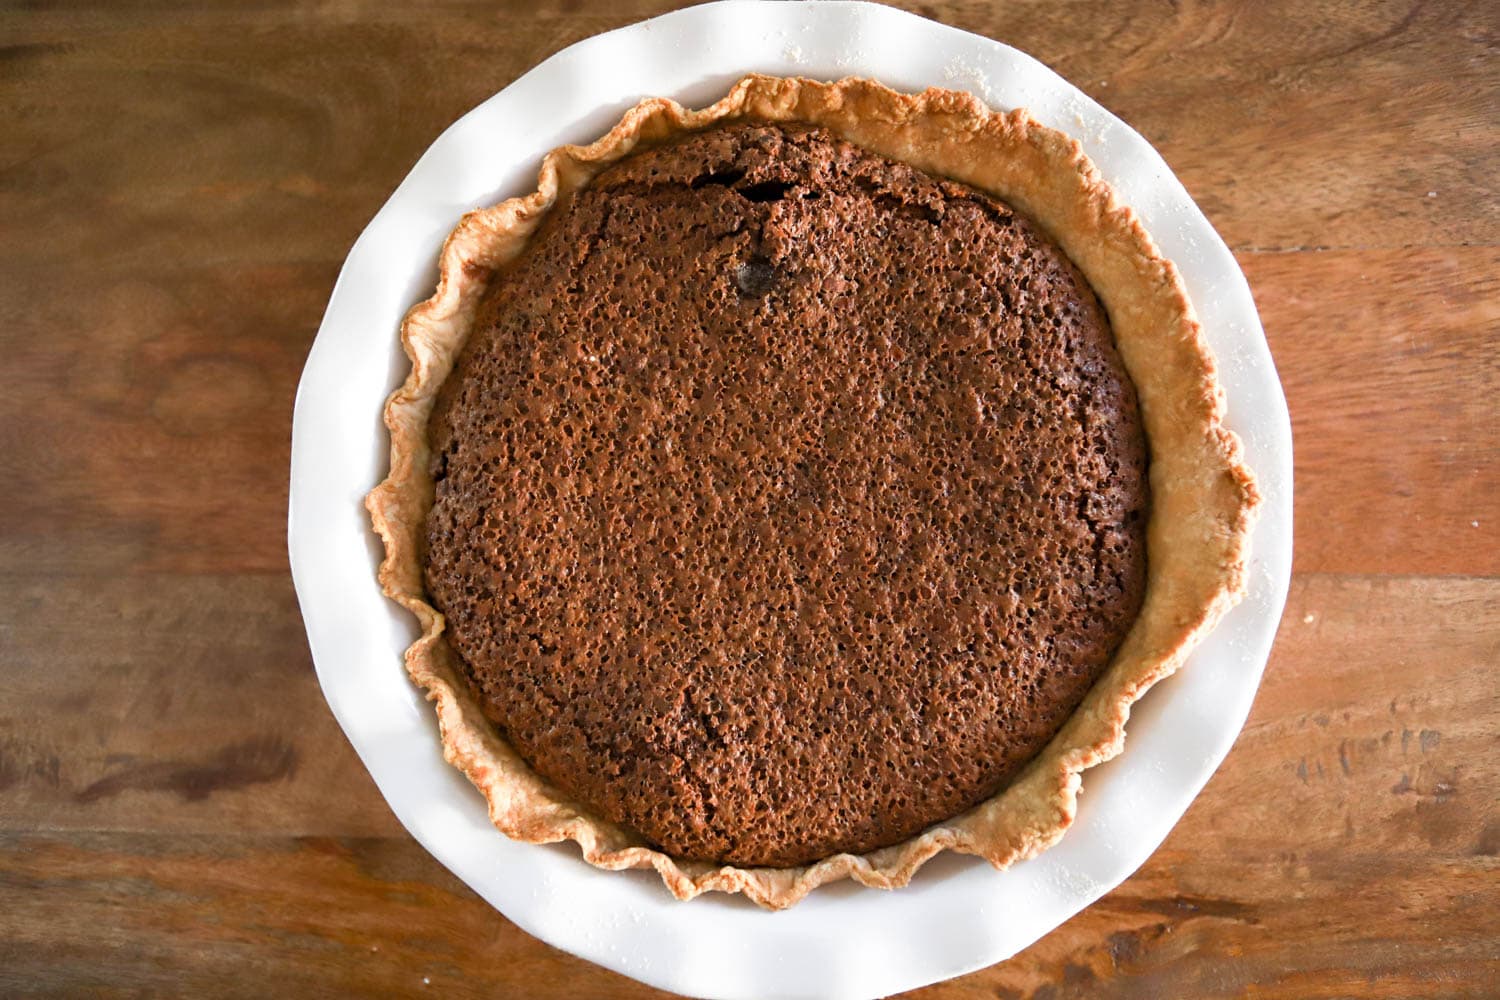 baked chocolate chess pie in white dish on wood background.